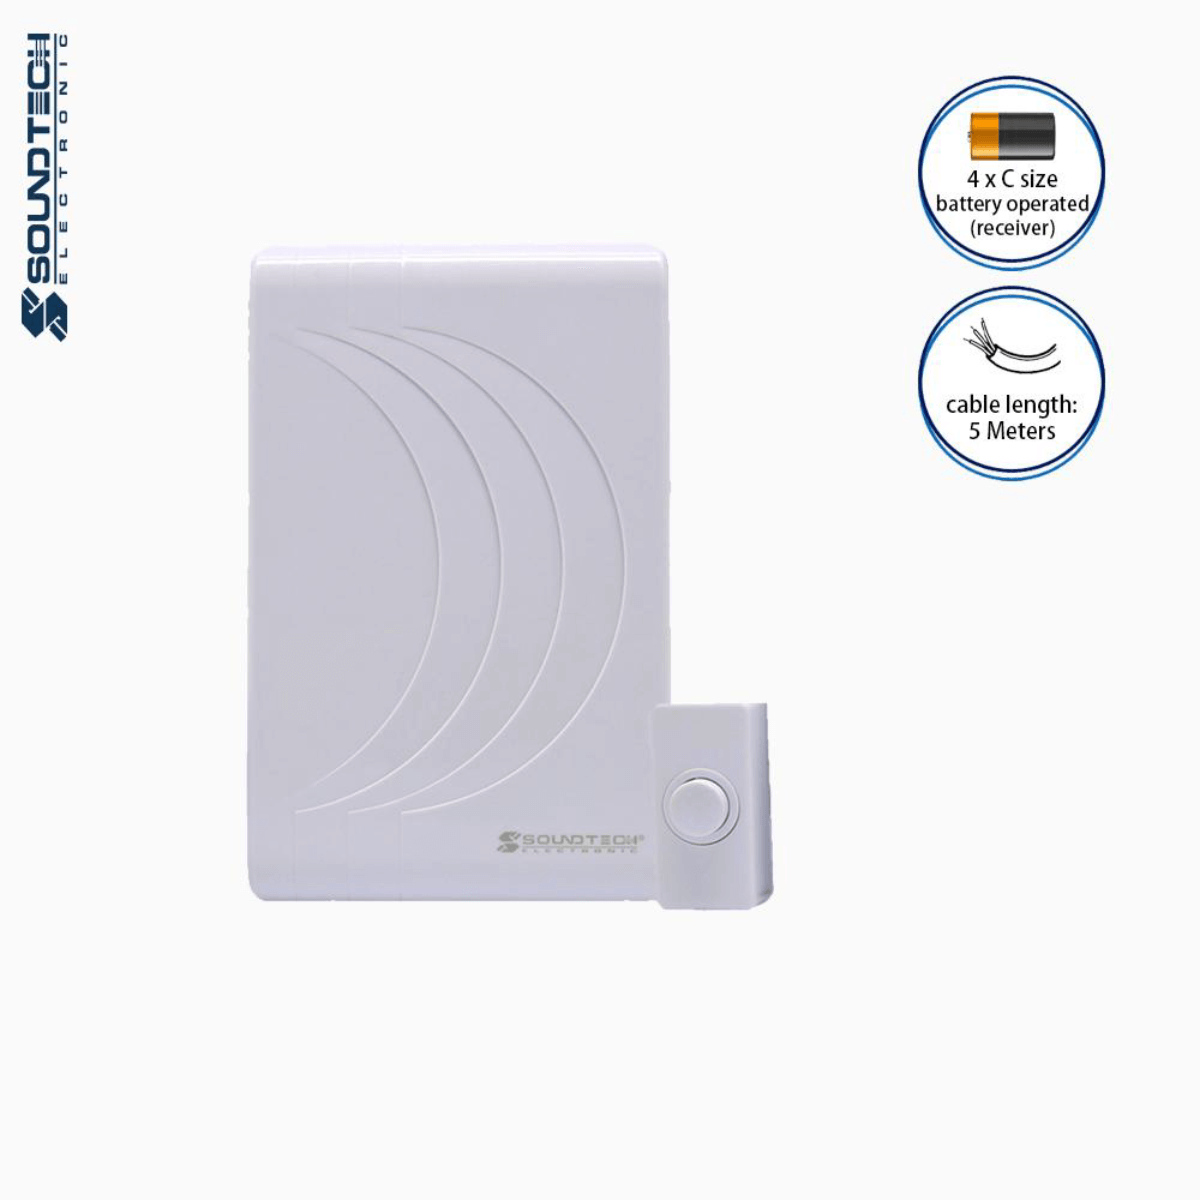 Soundteoh Mechanical Striking Wired Doorbell MDC-868